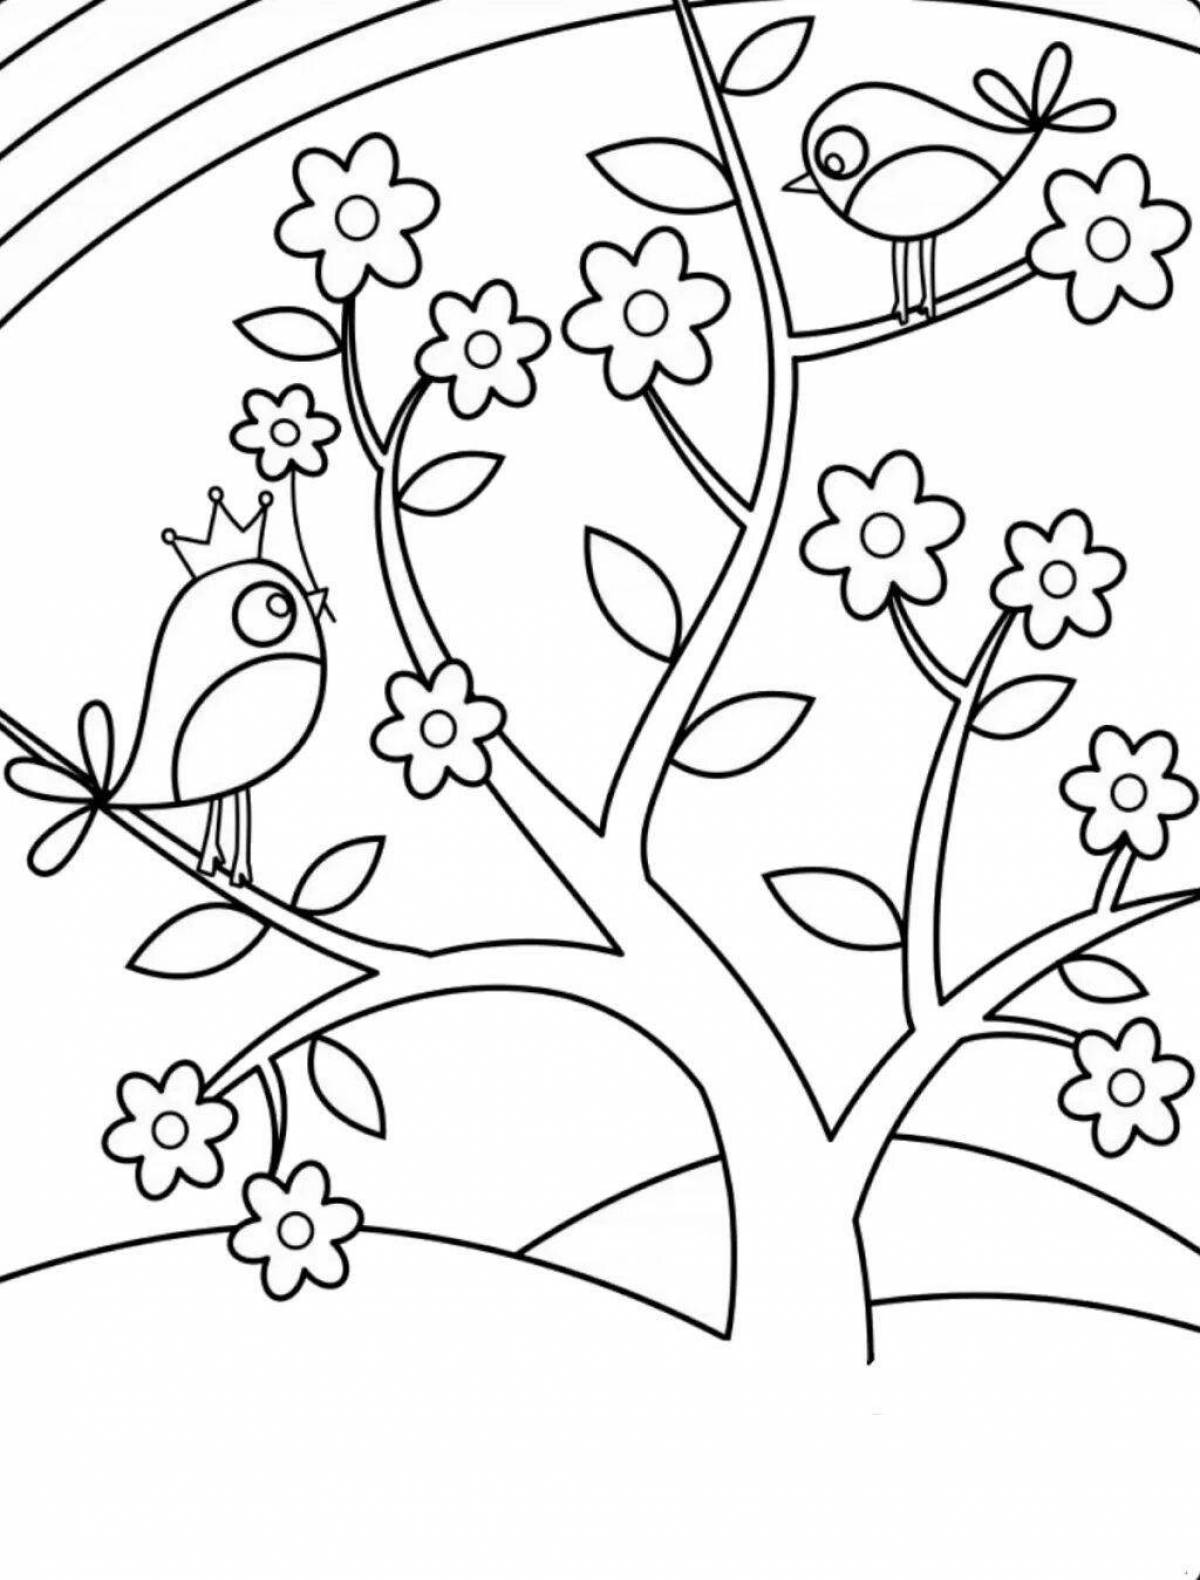 Live spring coloring for children 6-7 years old